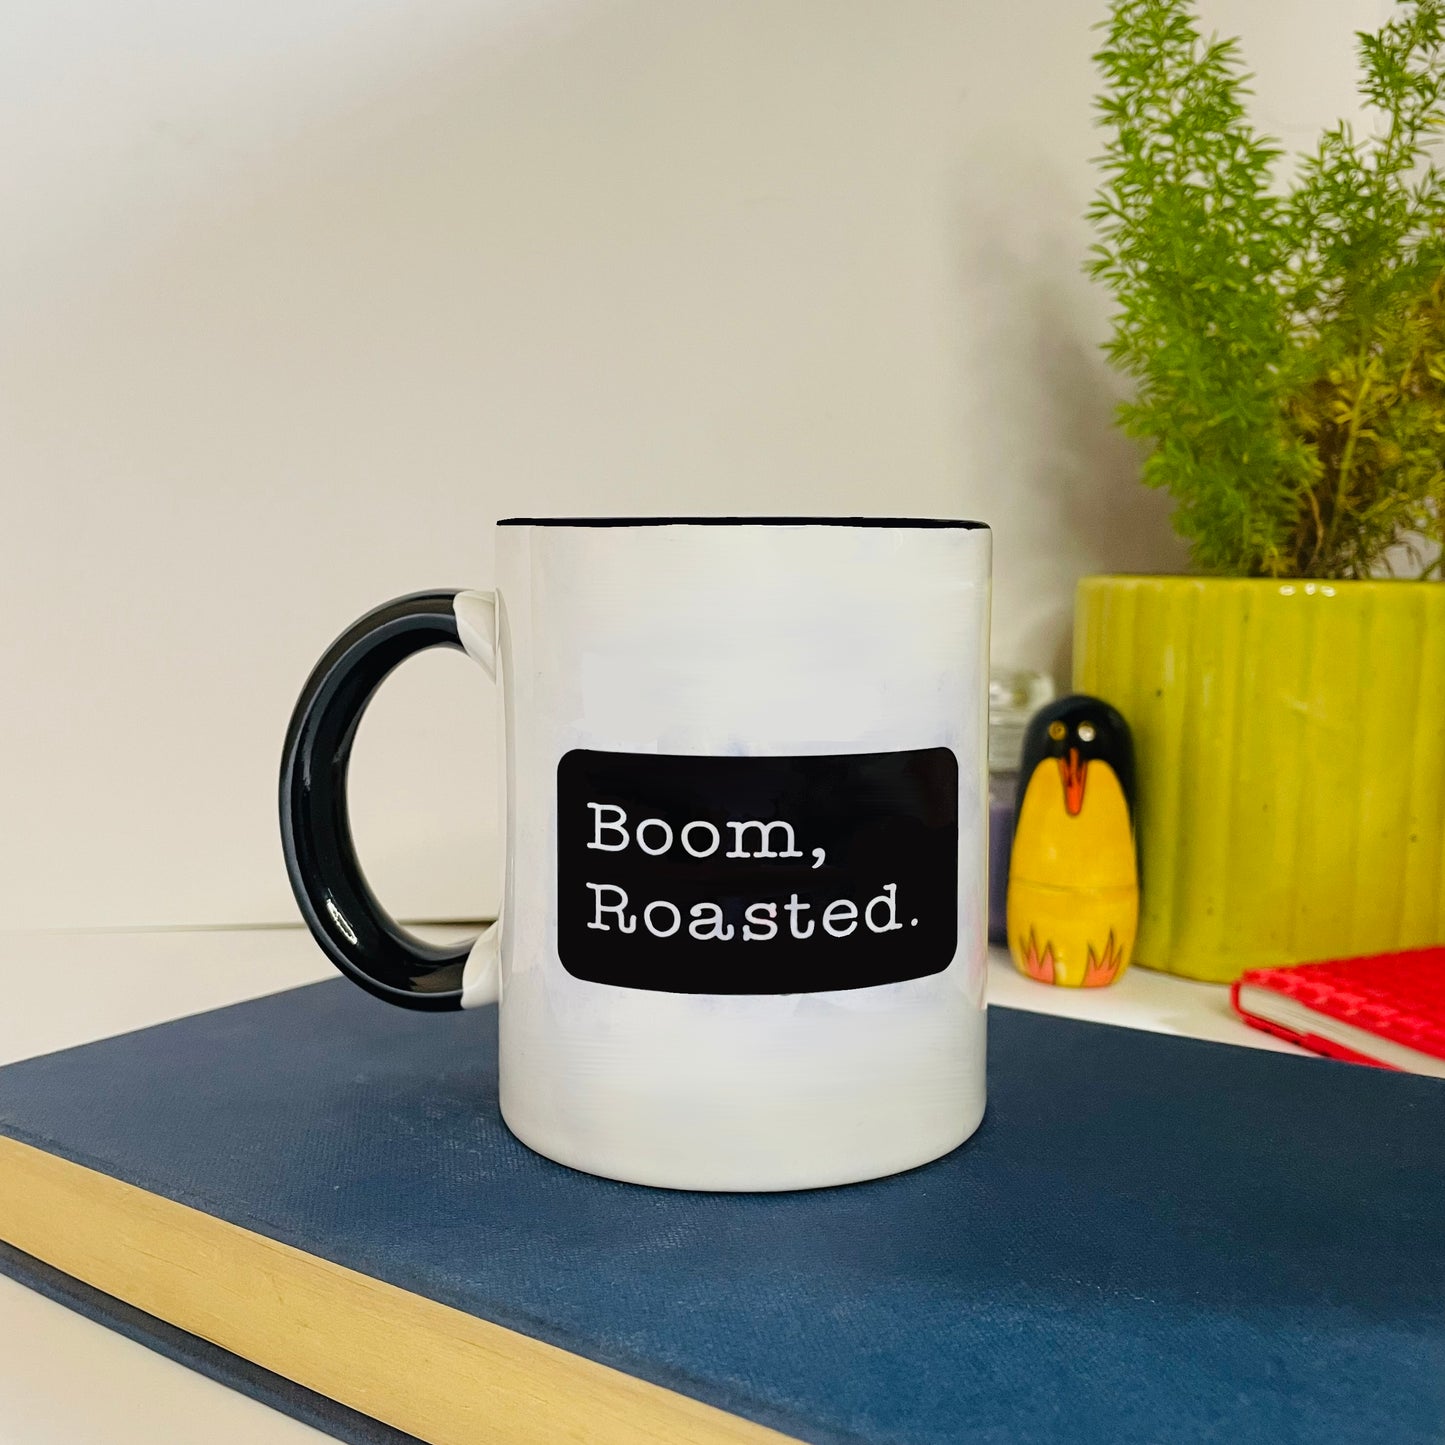 For the love of The Office, coffee mugs & quirky black merchandise. Makes an excellent gift choice for those in love with the sitcom: The Office